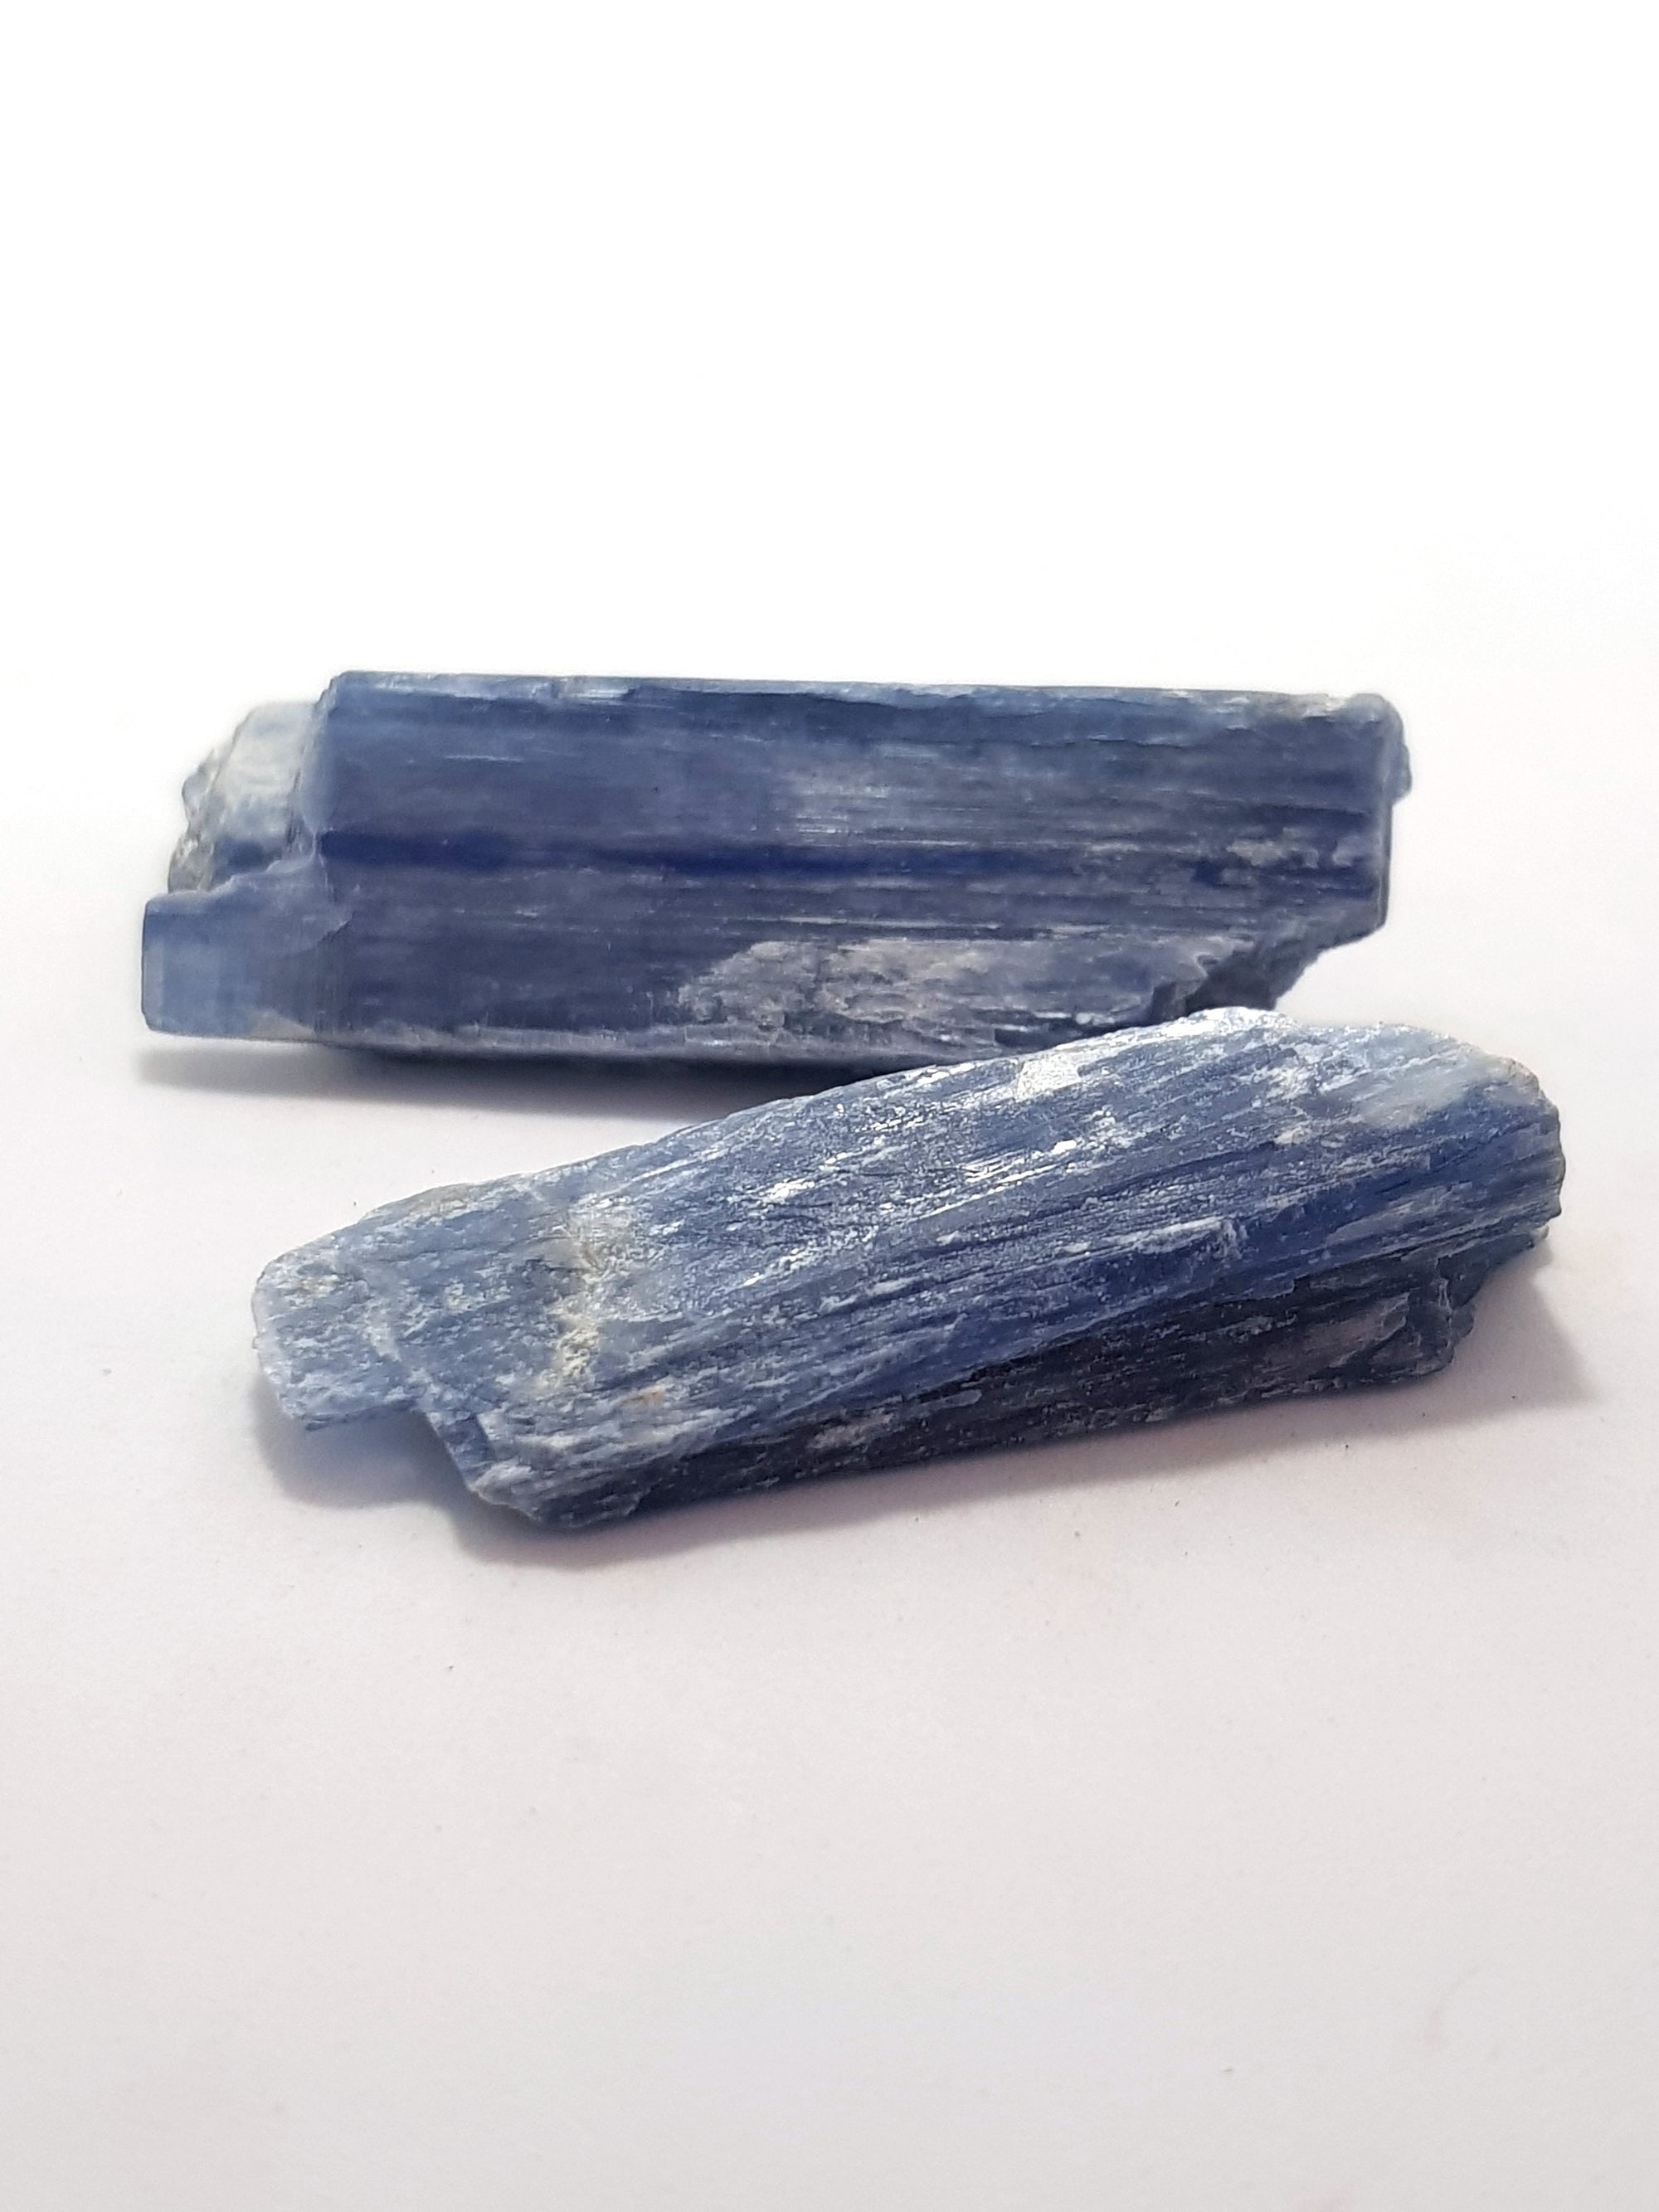 blue kyanite. These have well defined cleavage